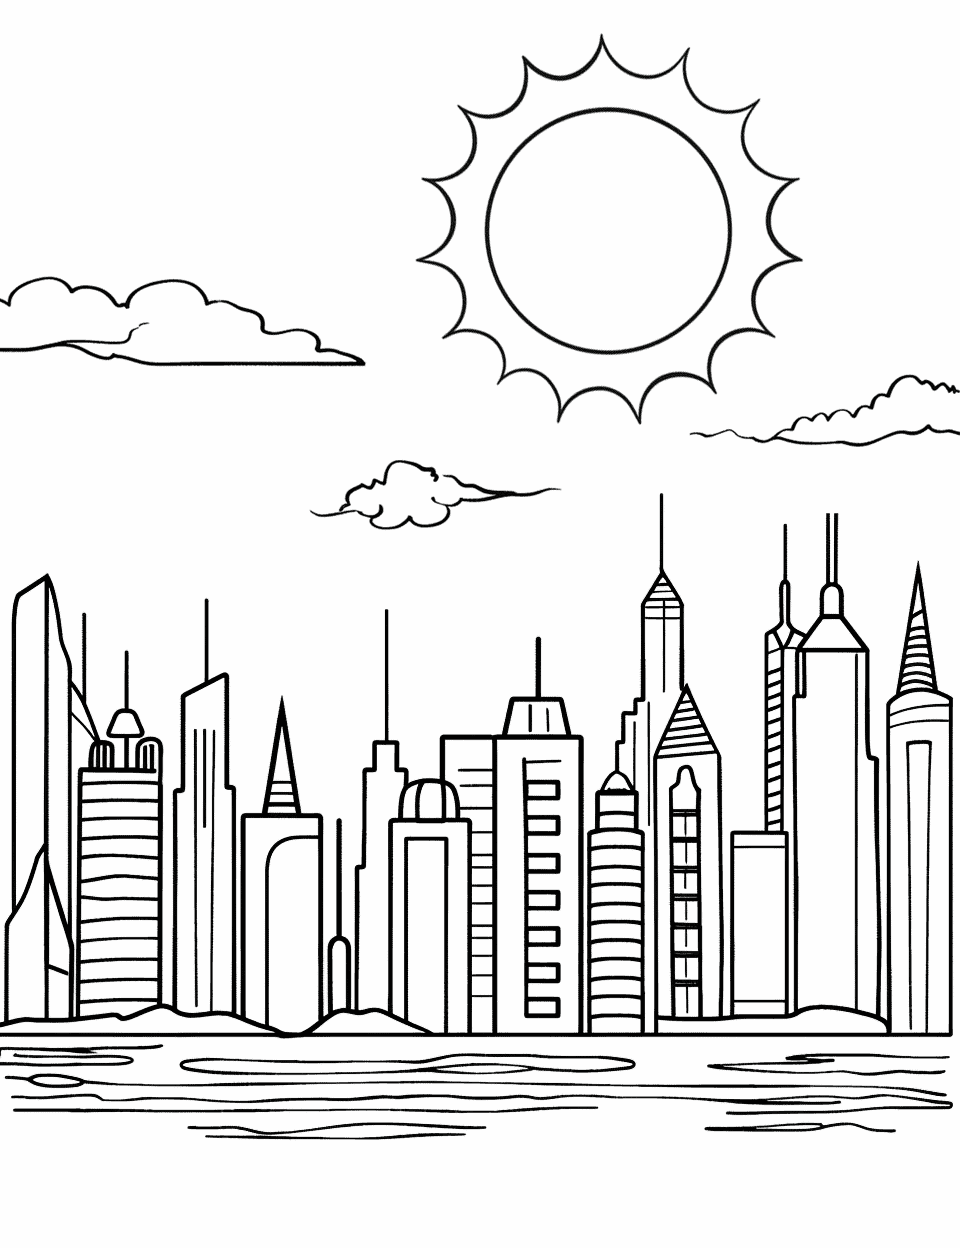 City Skyline under a Sunny Sky Sun Coloring Page - A city skyline with the sun shining brightly above it.